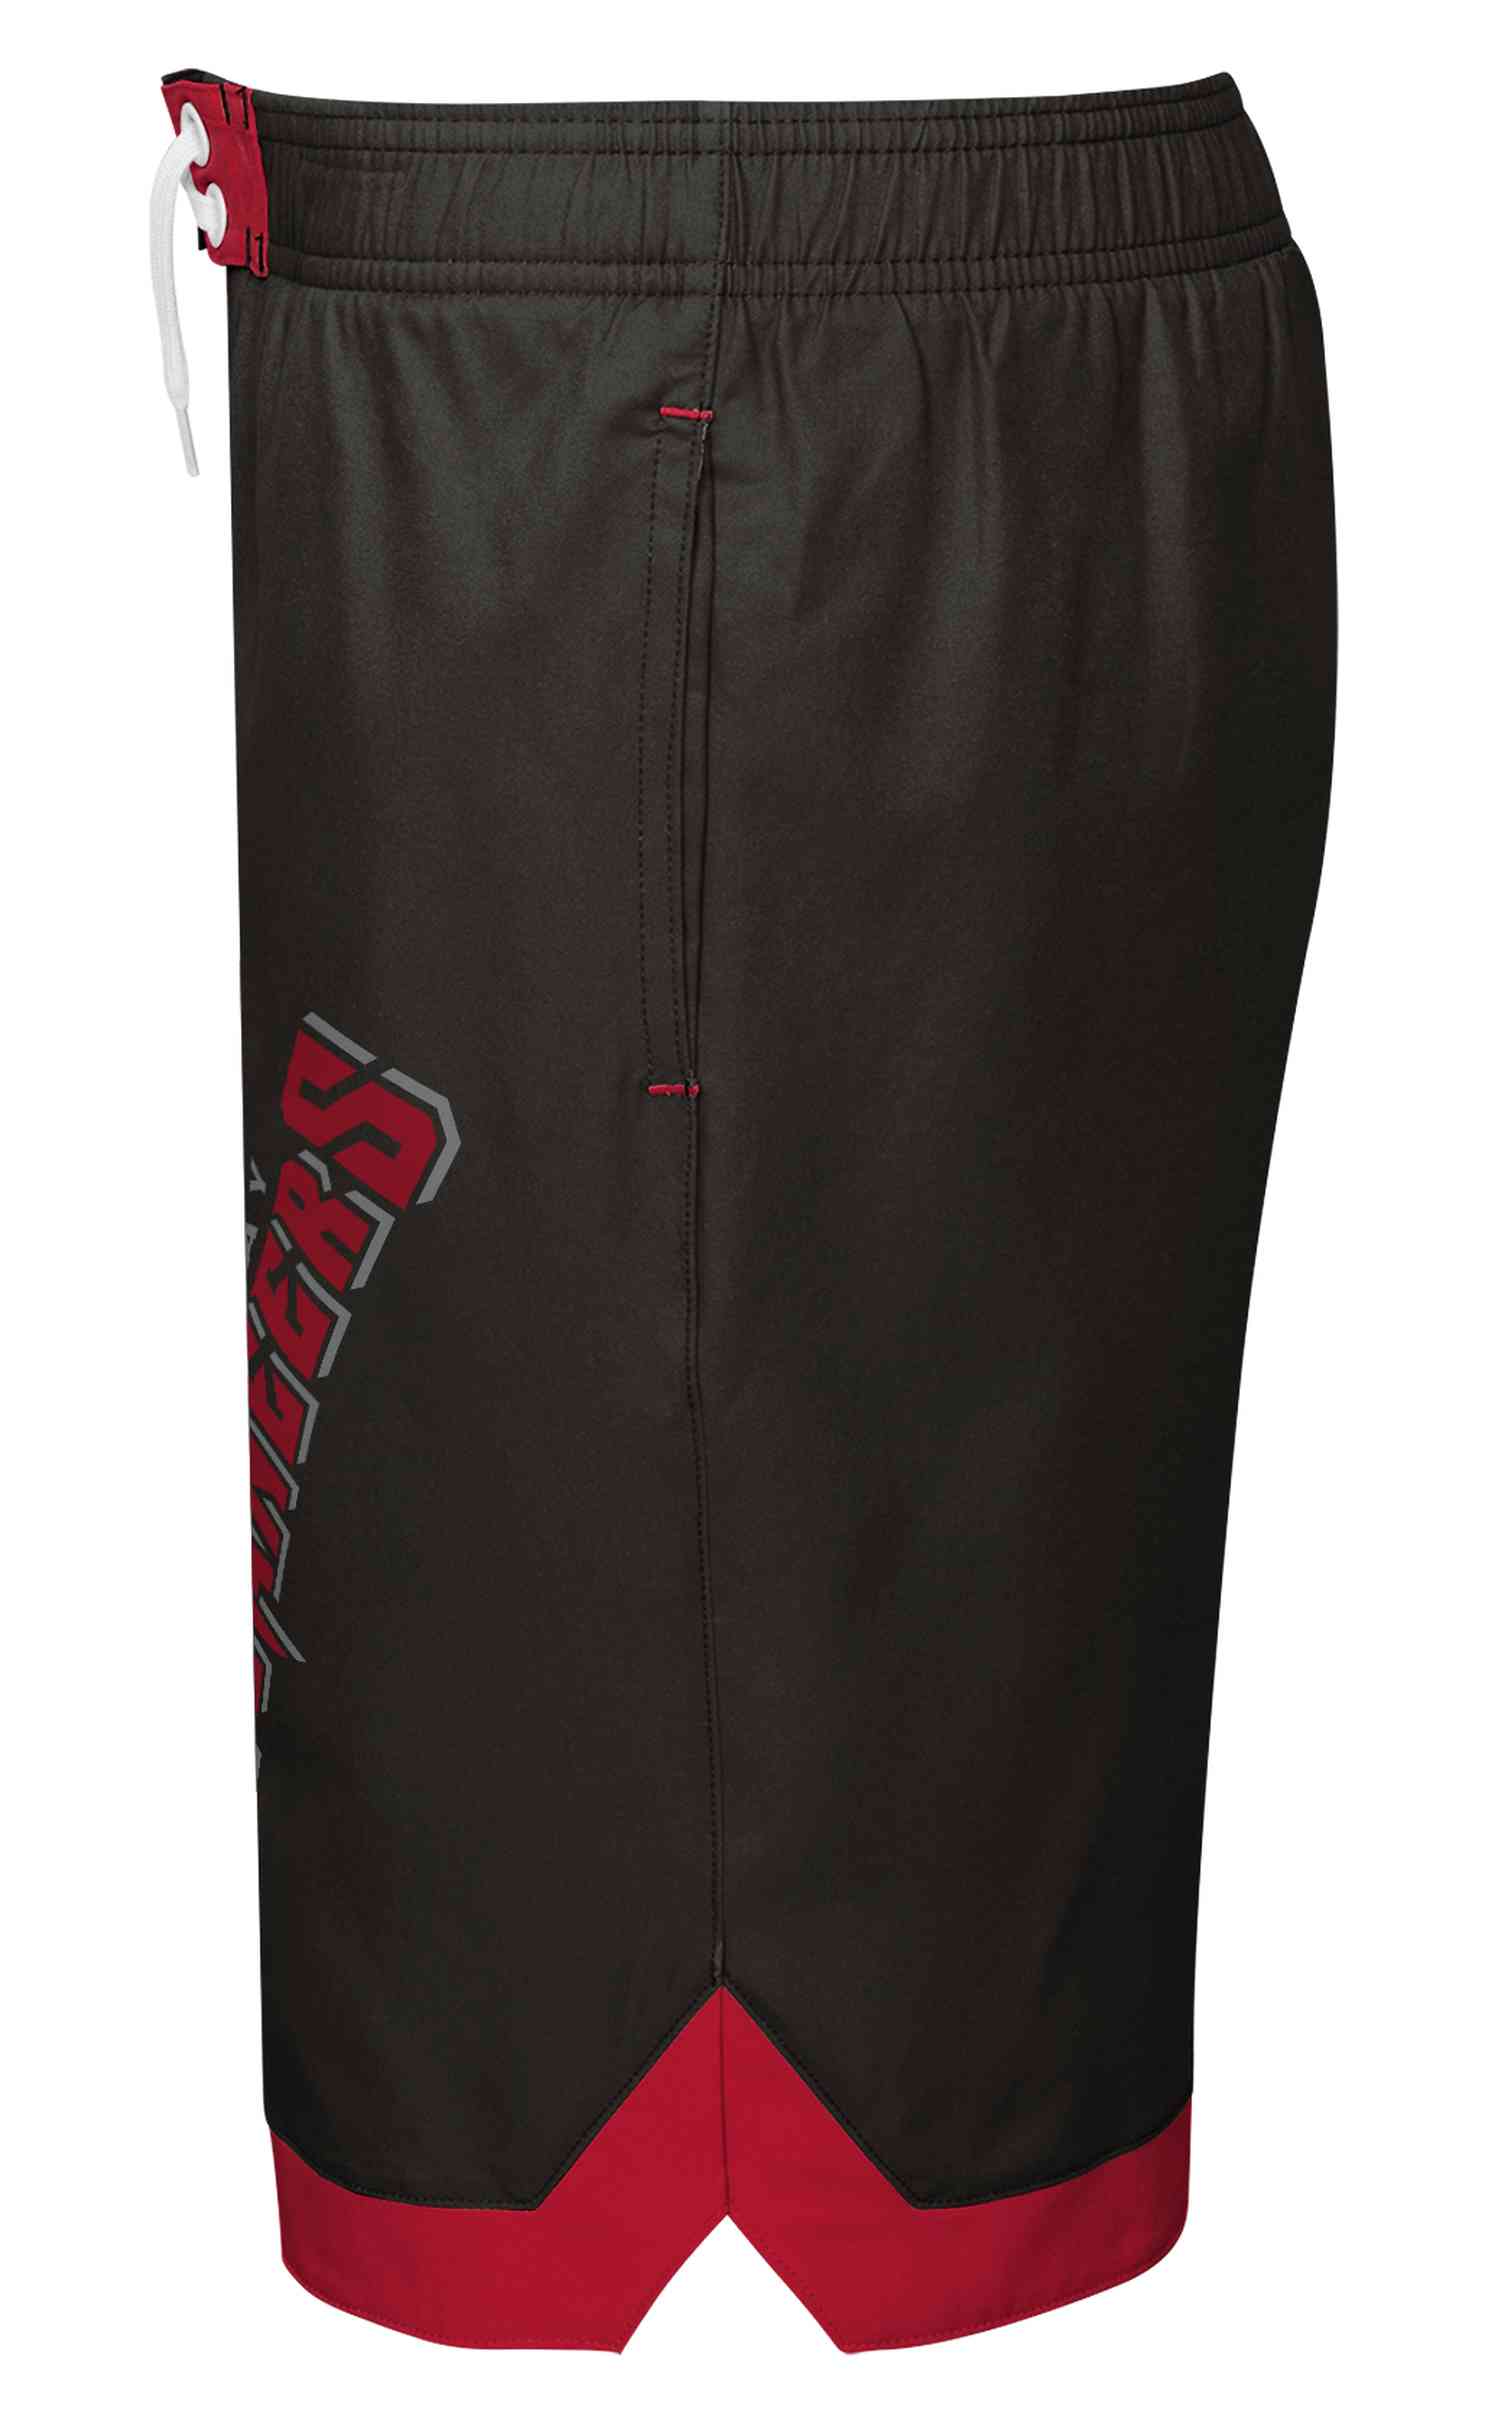 Mitchell & Ness - NFL Tampa Bay Buccaneers Conch Bay Kinder Board Shorts